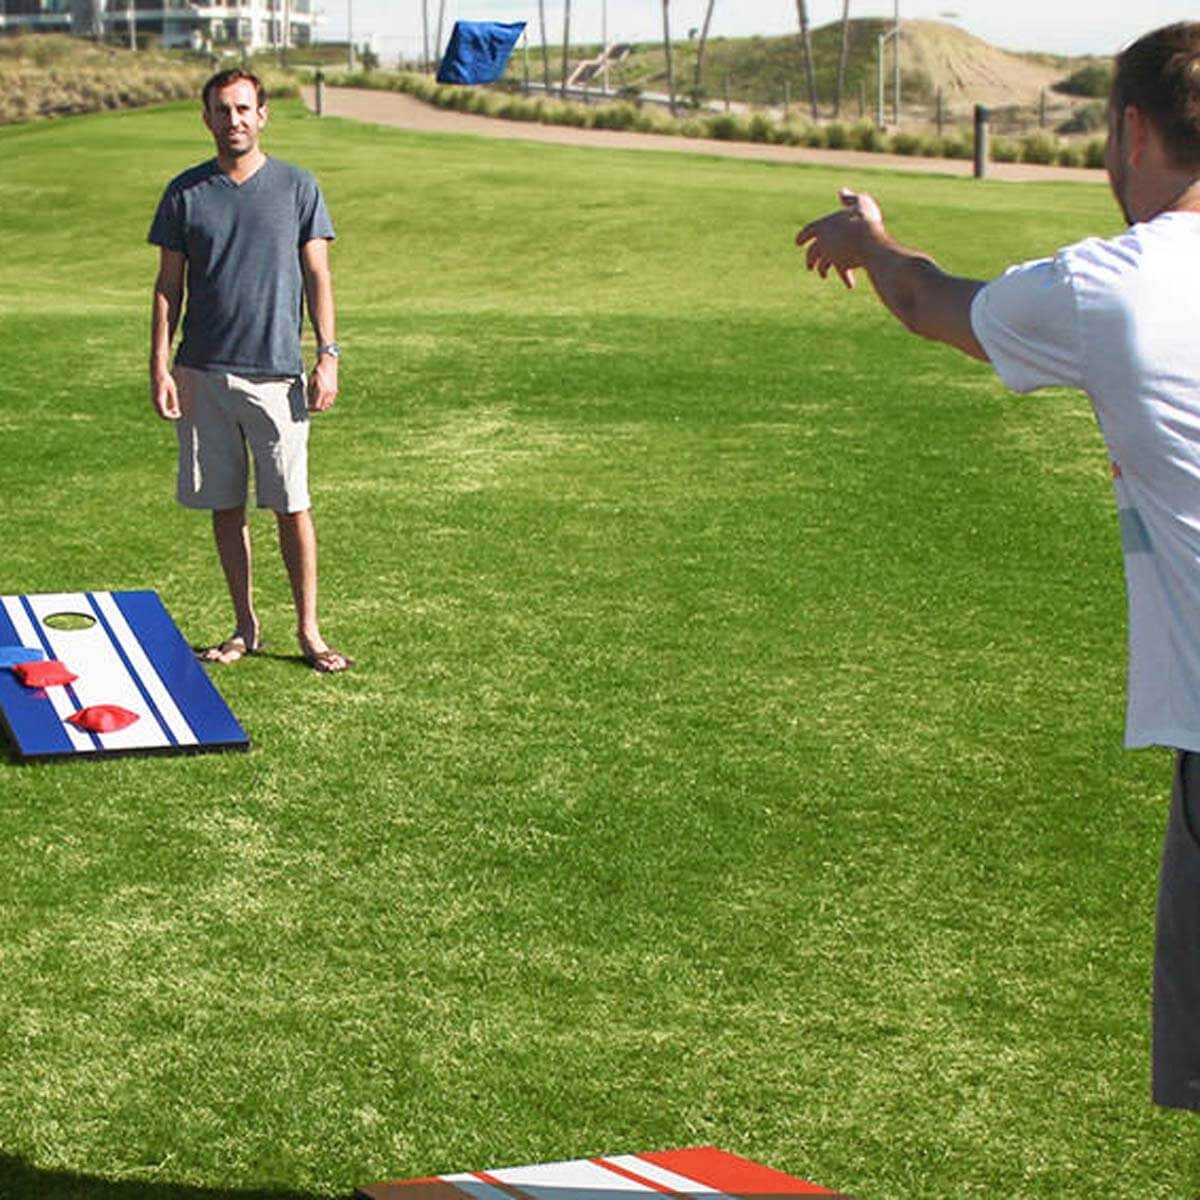 Game on! Build your own corn hole boards